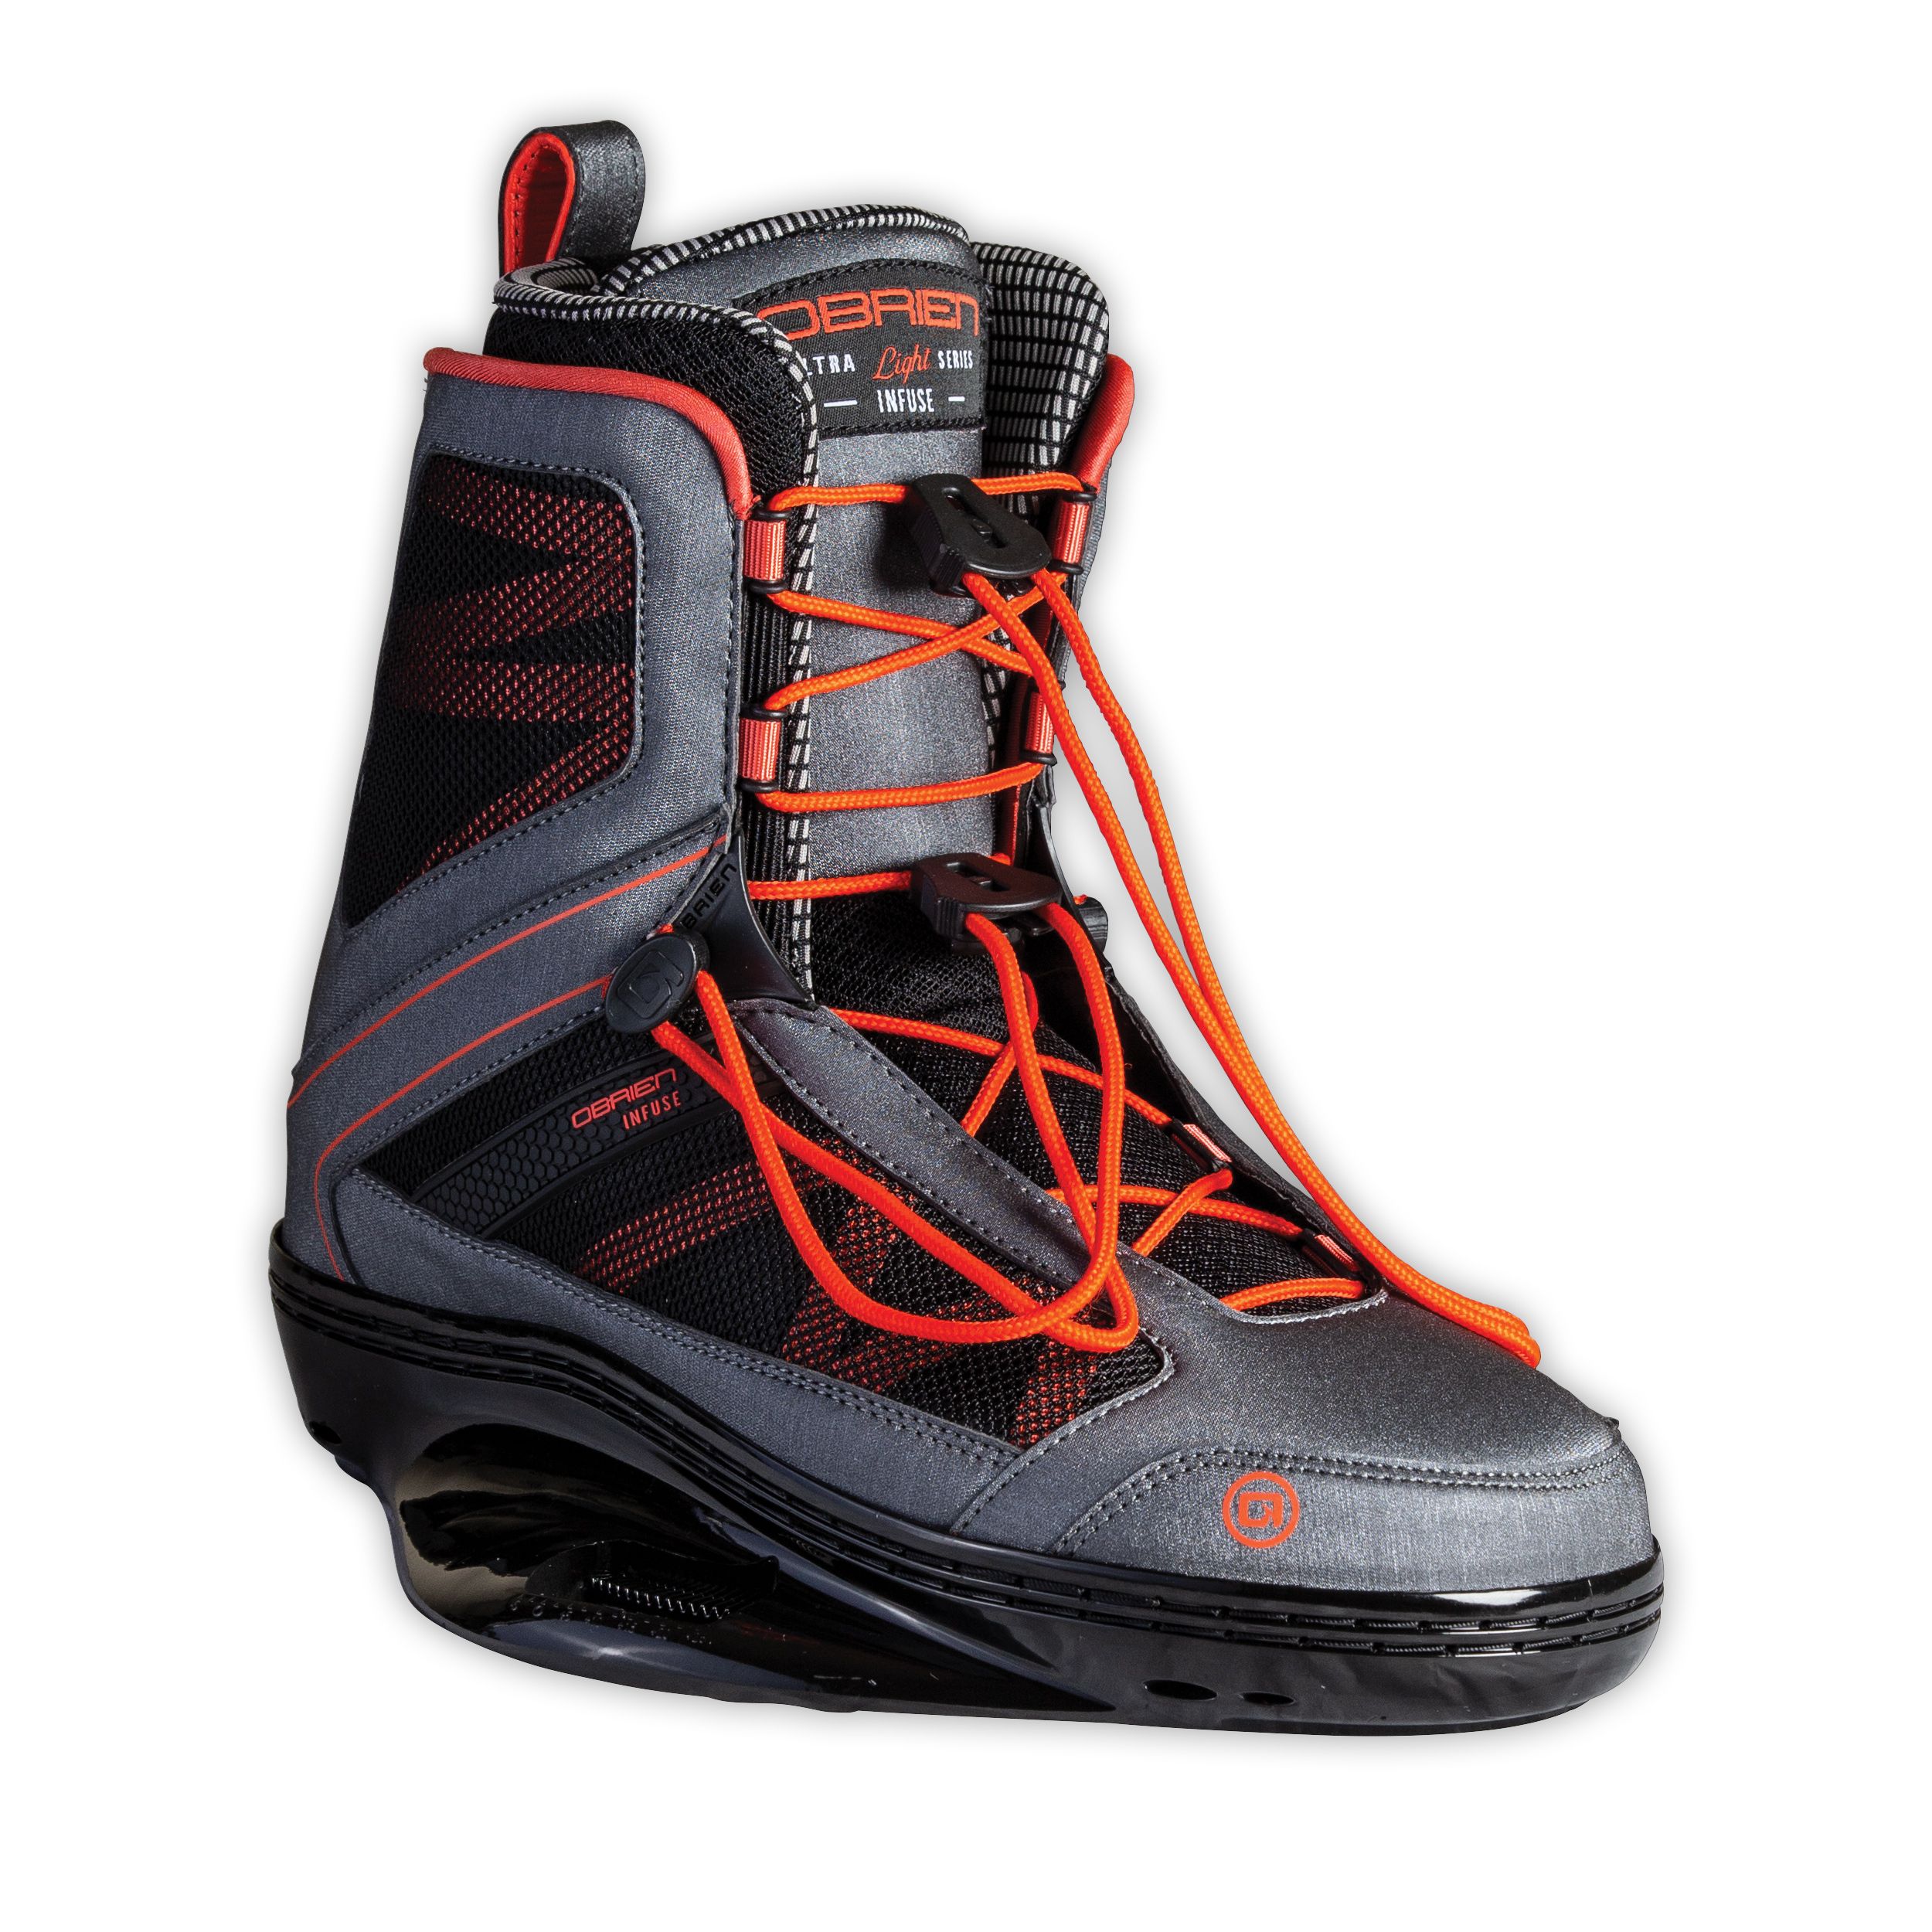 Chausses de wakeboard INFUSE 2020 - OBRIEN